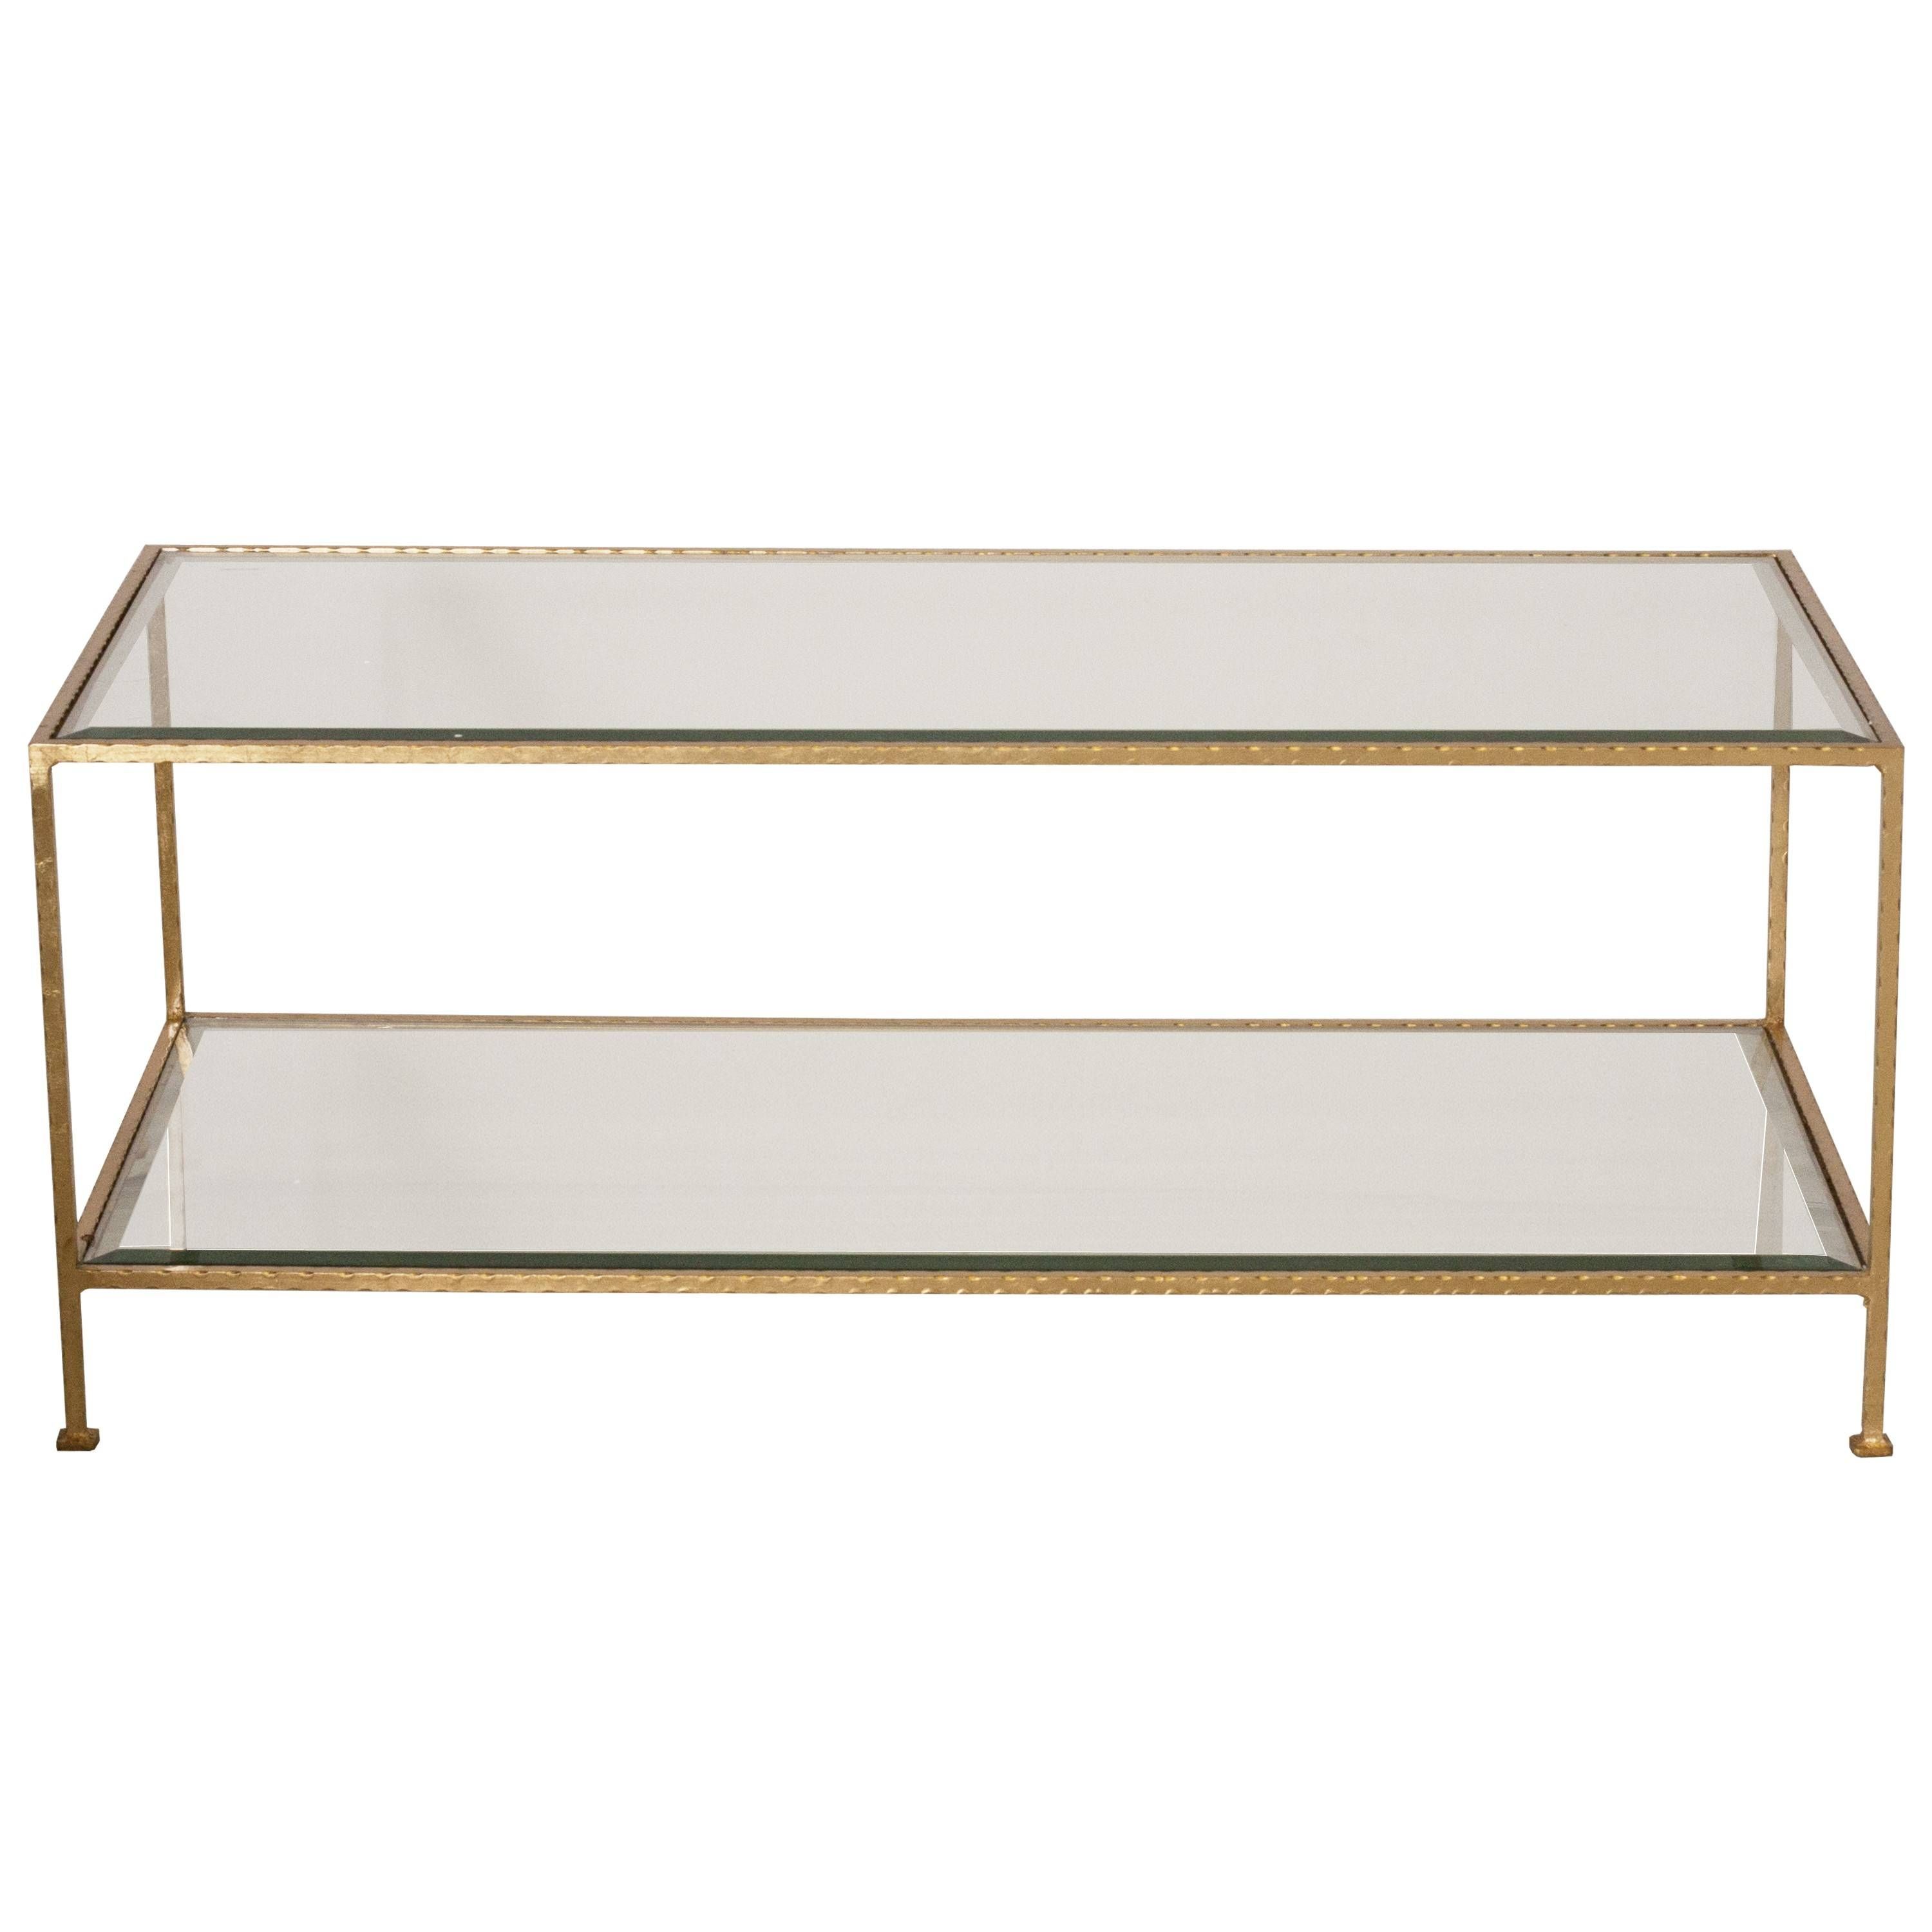 Coffee Table: Excellent Gold Metal Coffee Table Designs Metal And Regarding Glass Metal Coffee Tables (View 12 of 30)